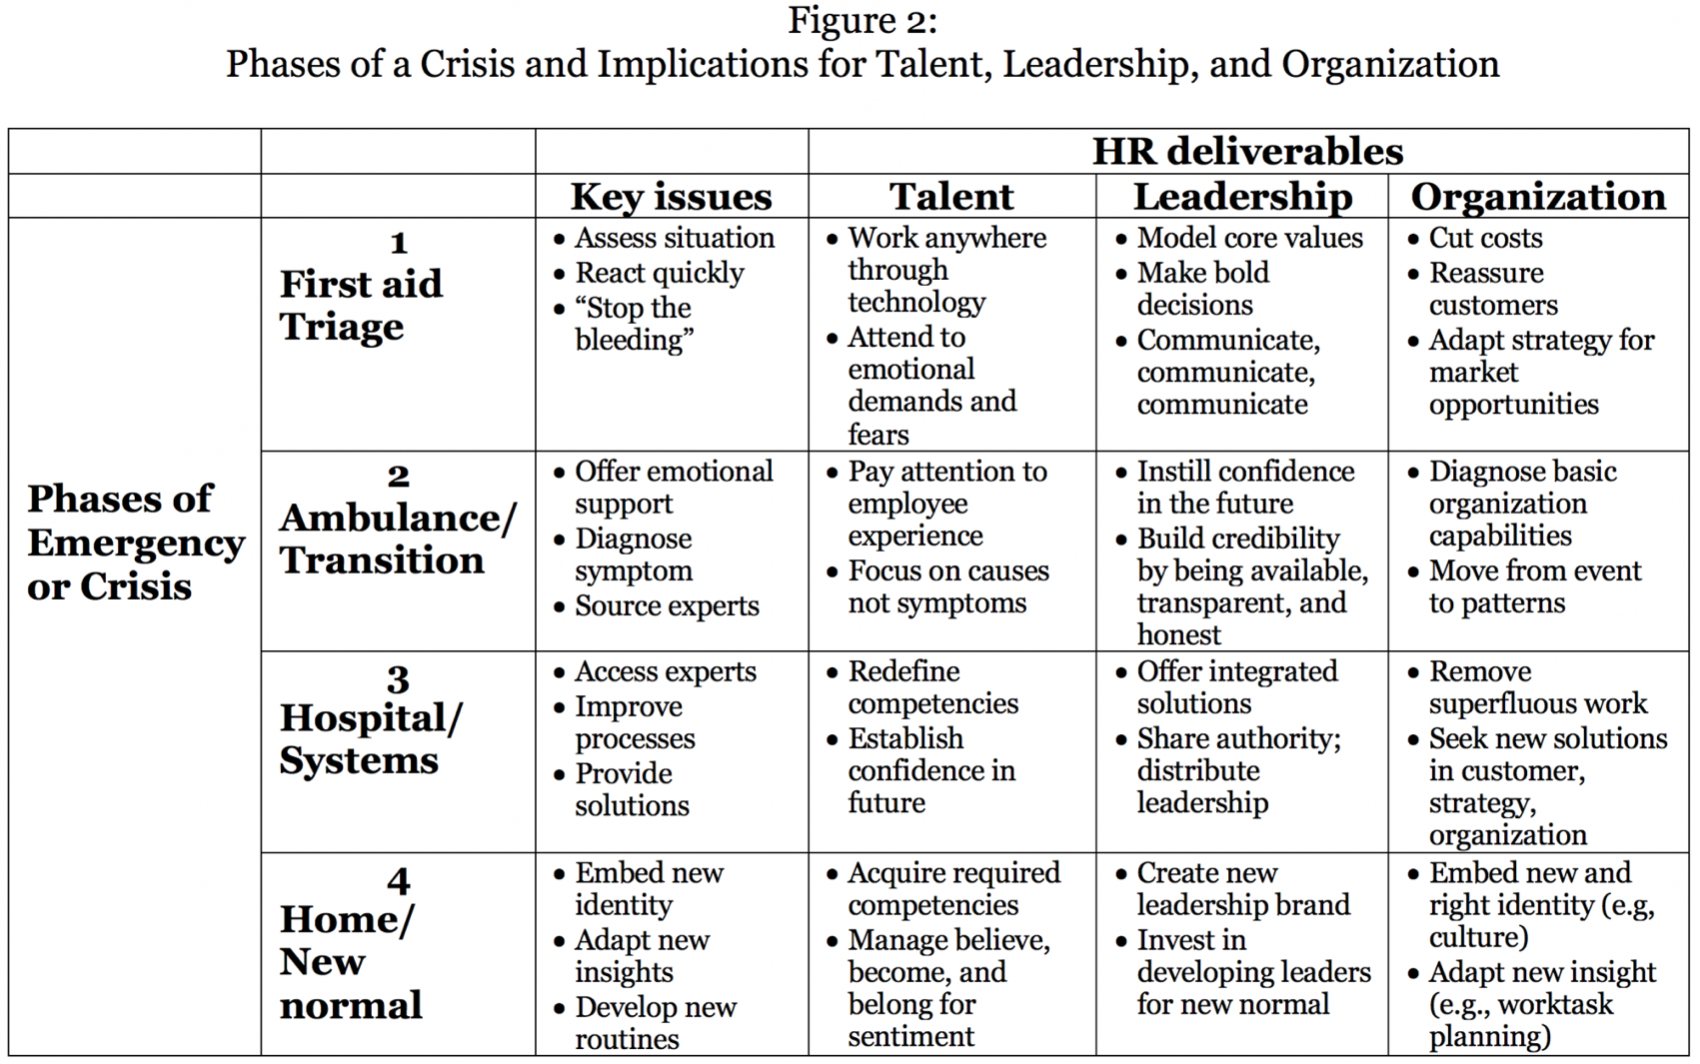 Table: Phases of a Crisis and Implications for Talent, Leadership, and Organization